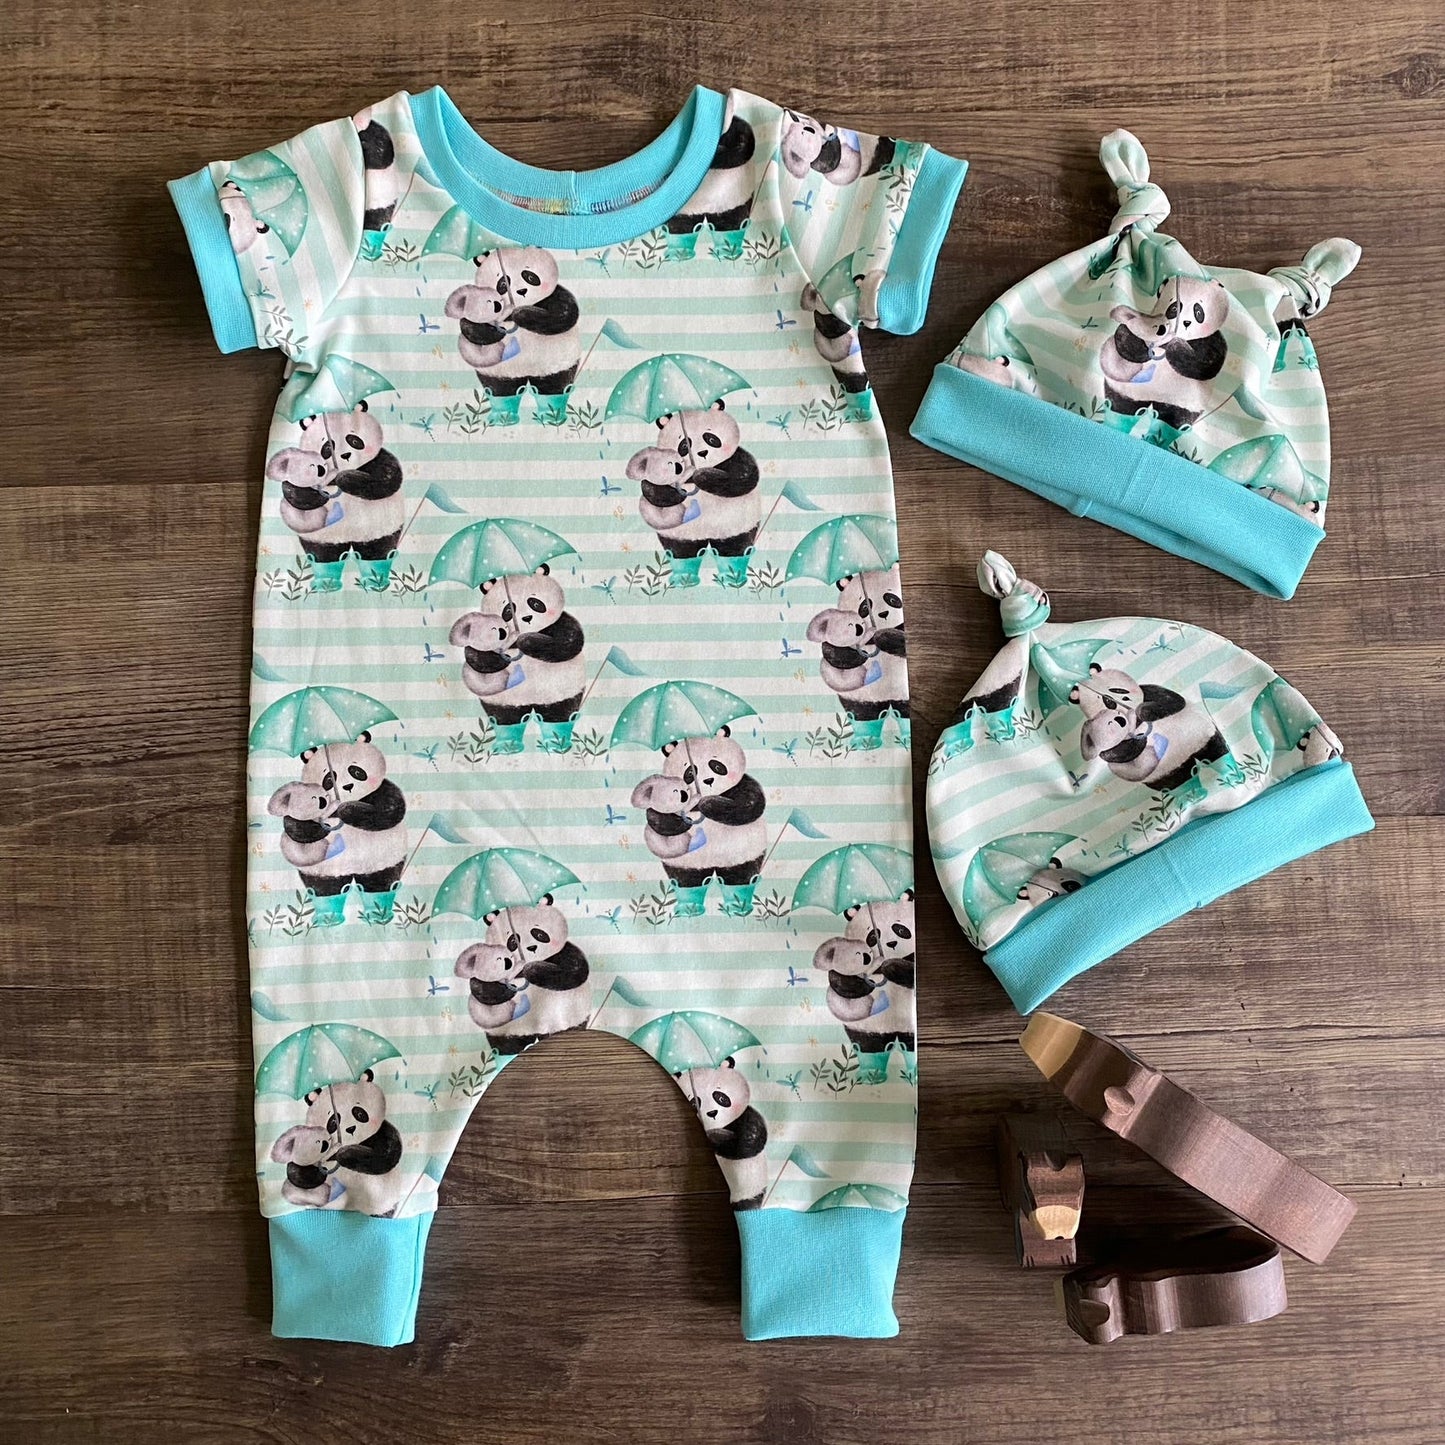 Cupcakes - Pick and Mix Pull Up Romper